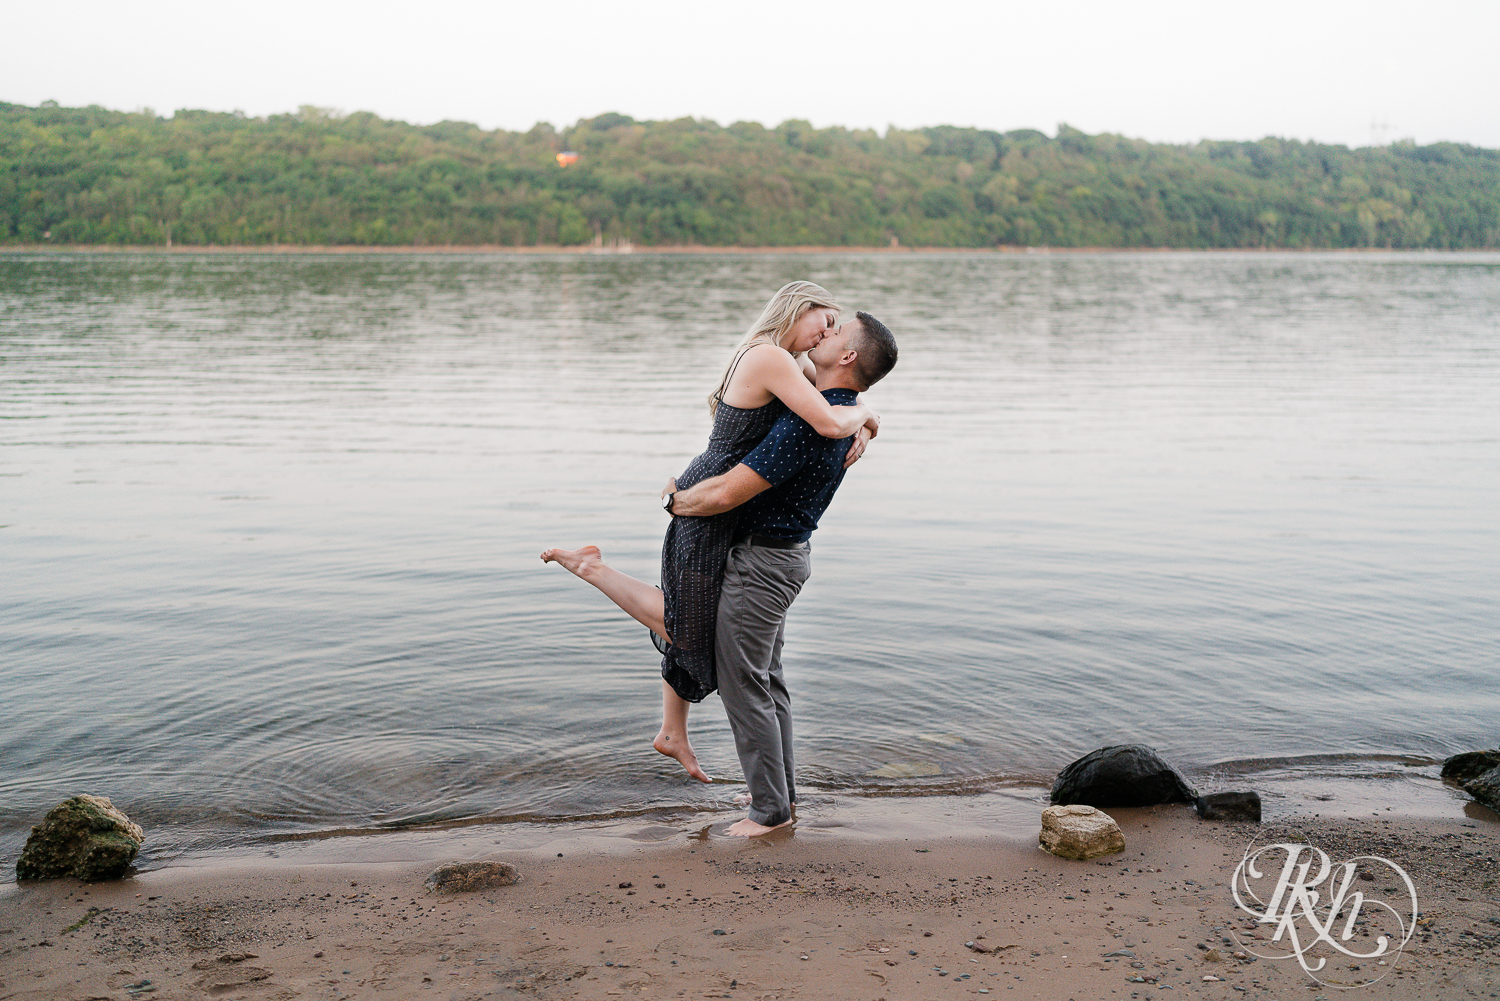 Man and woman in blue dress kiss on beach at Afton State Park in Hastings, Minnesota.